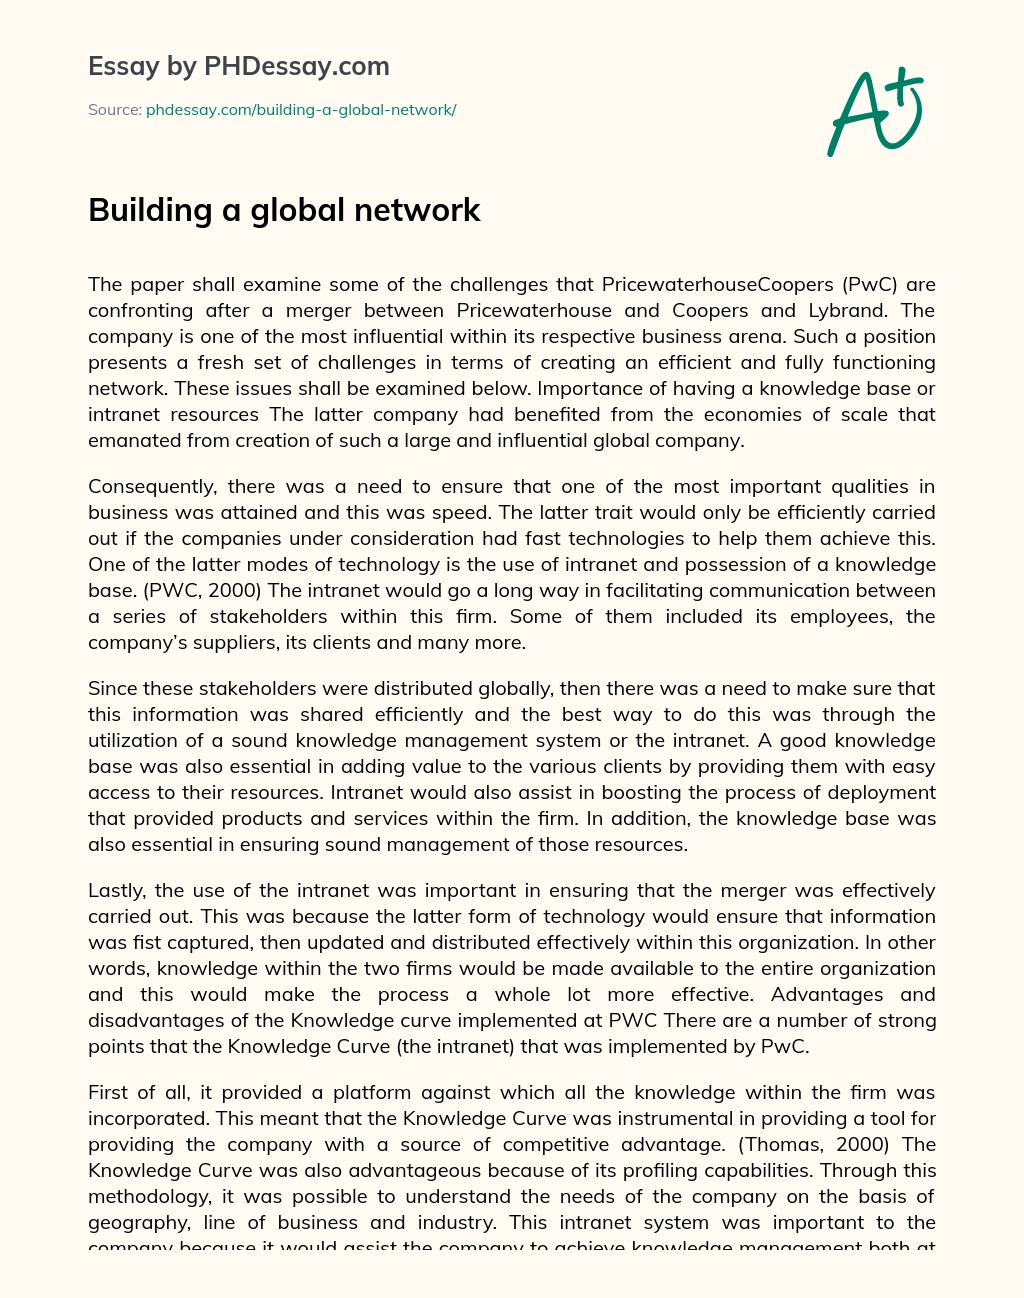 Building a global network essay